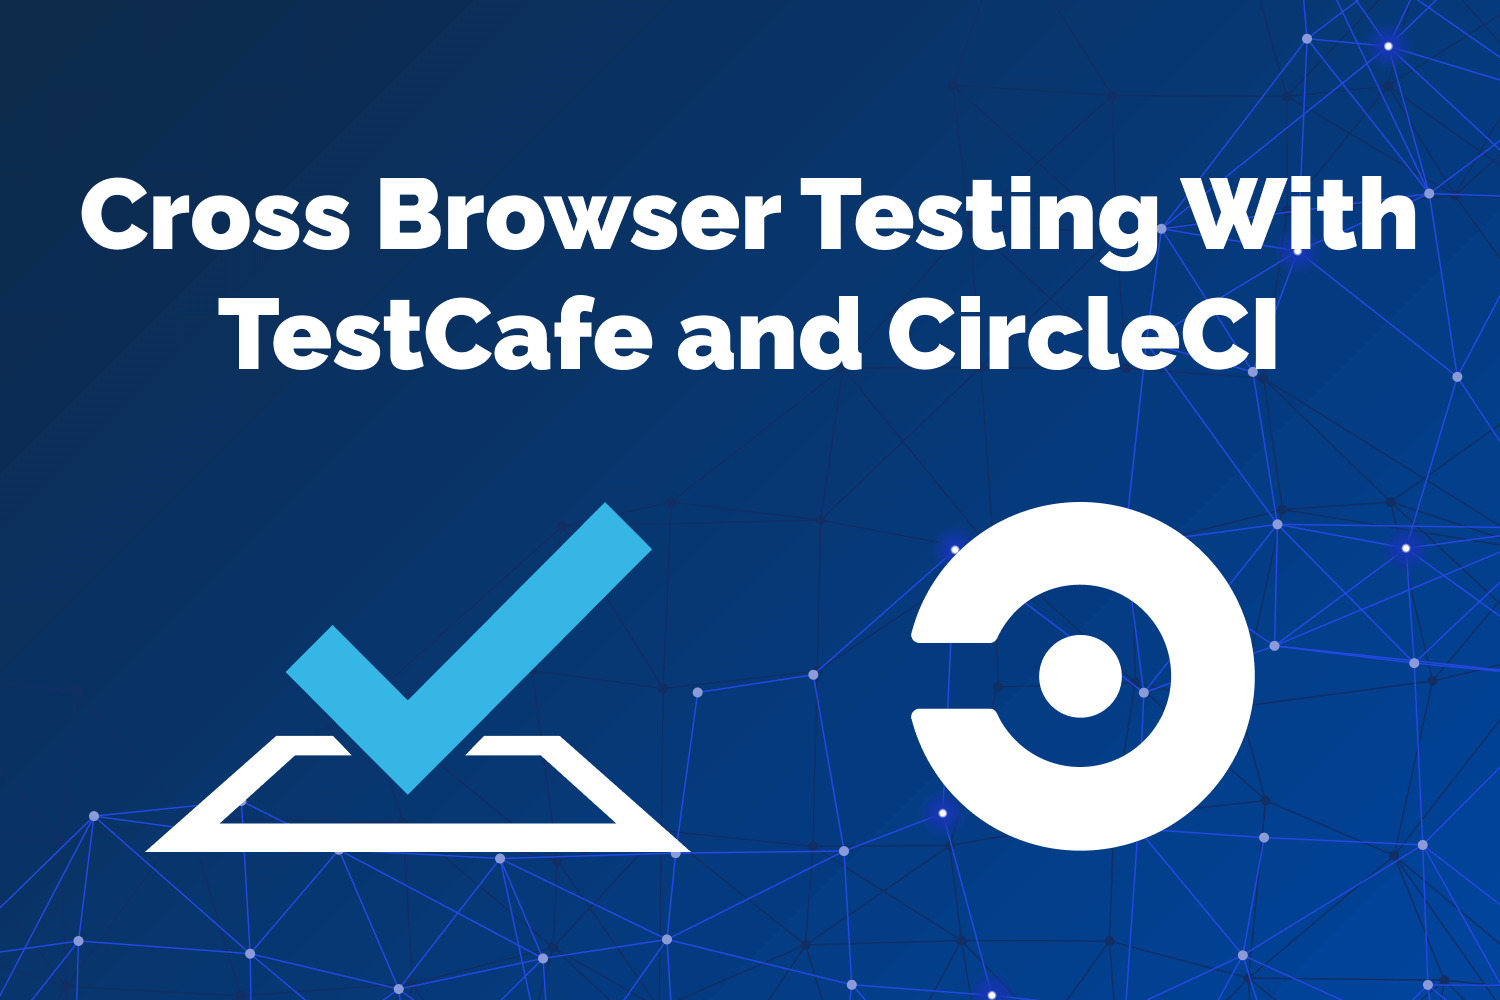 Cross Browser Testing With TestCafe and CircleCI